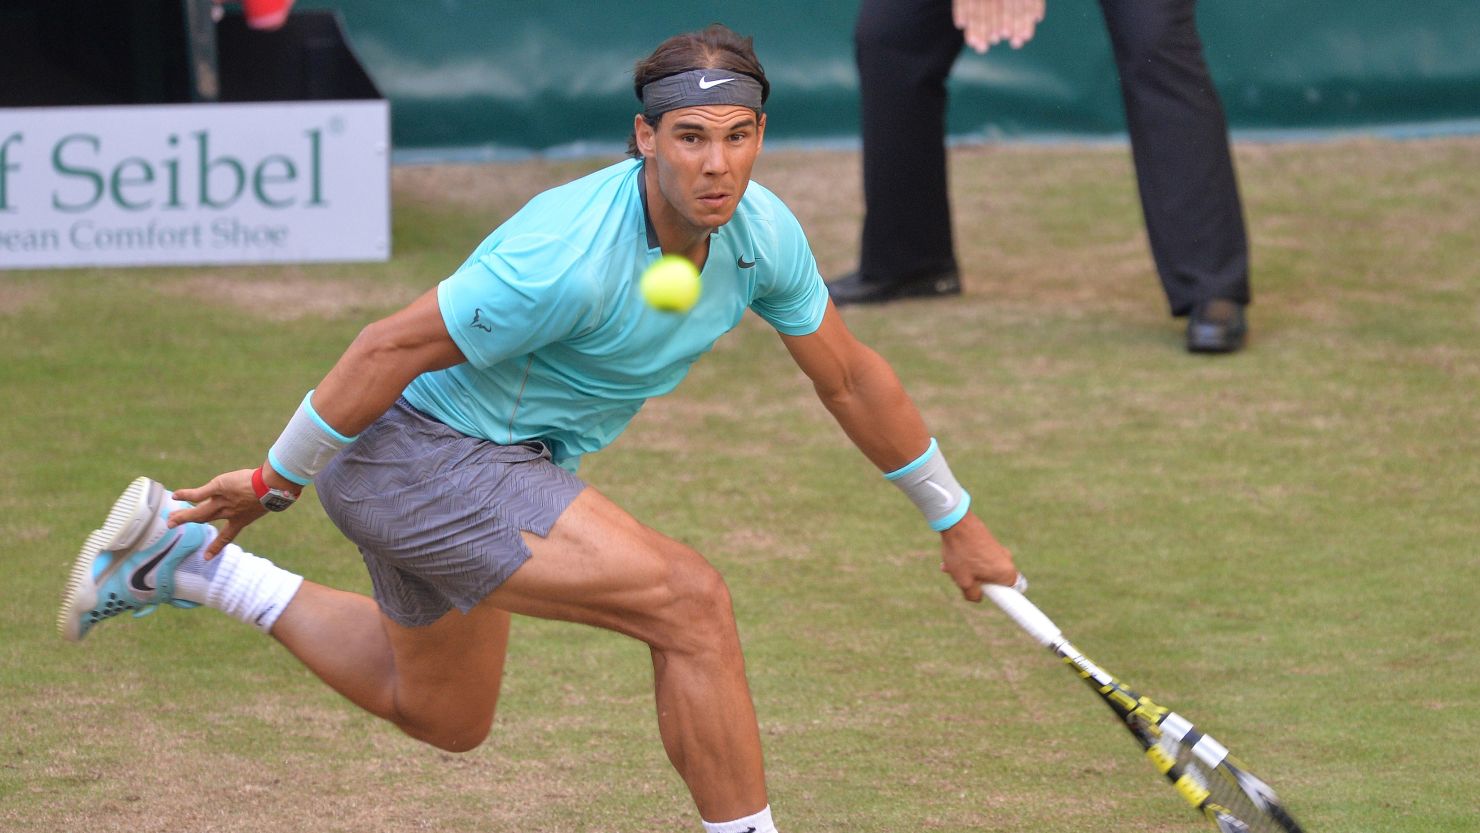 Rafael Nadal was beaten in straight sets by Germany's world No. 85 Dustin Brown at Halle.